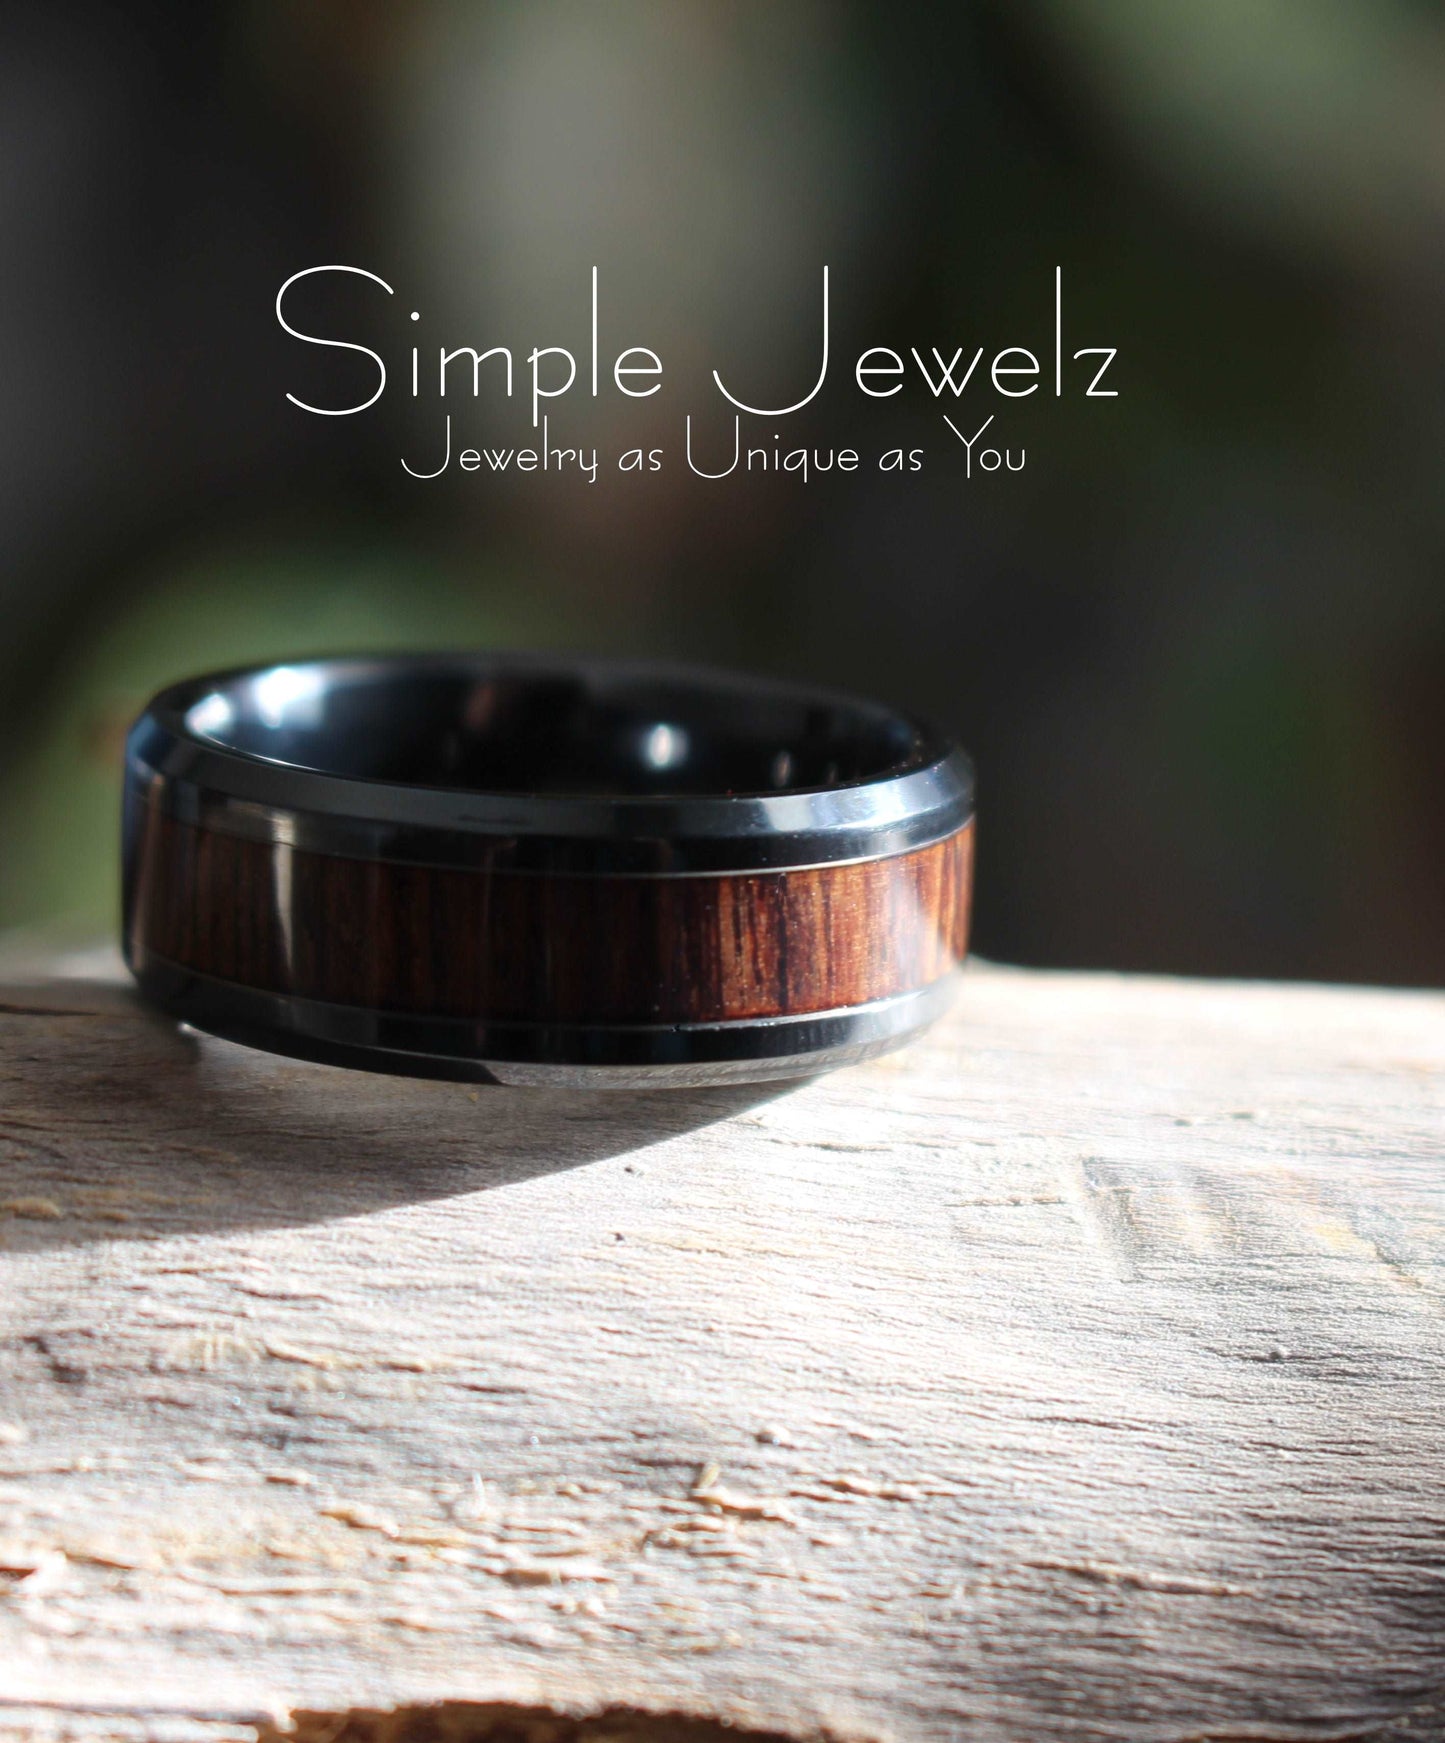 Black Ceramic Ring with Rosewood Inlay